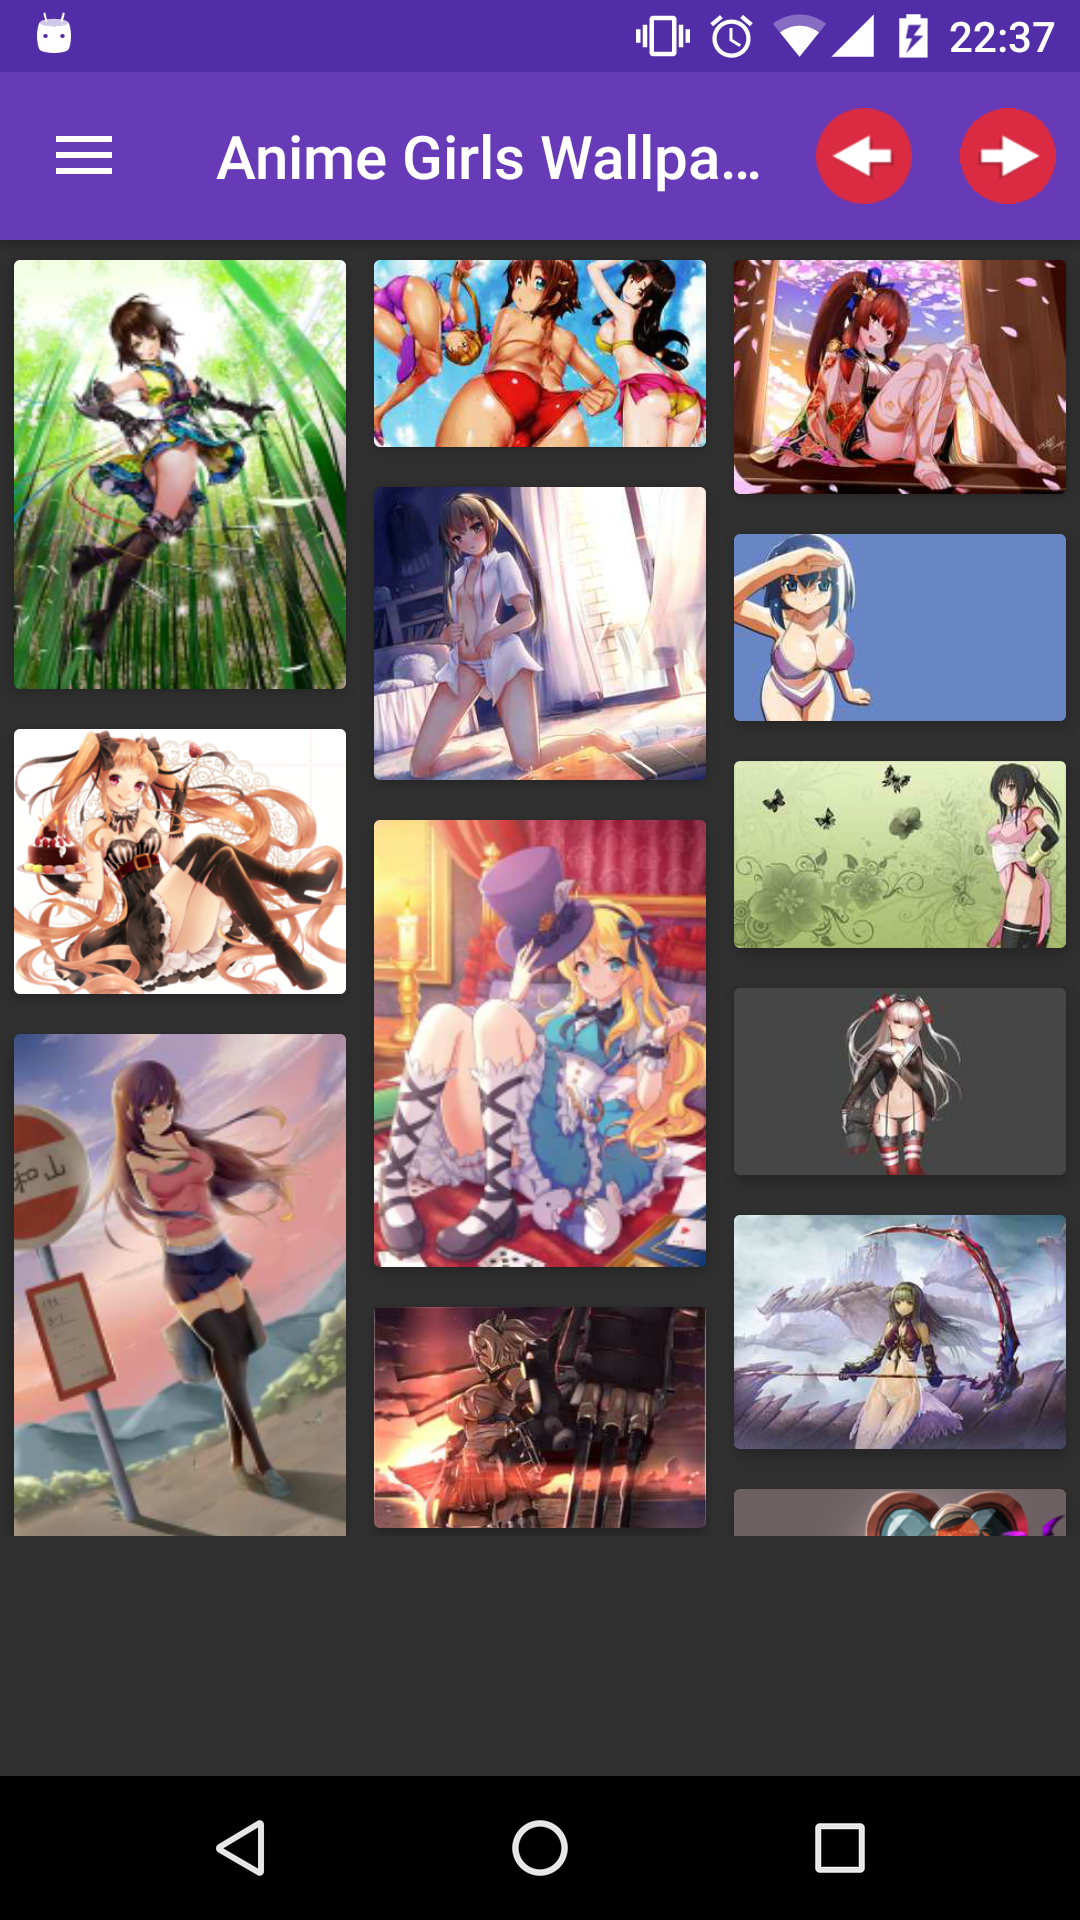 Anime Girls Backgrounds backgrounds,anime,lisa,porn,erotic,pornstars,android,apps,for,pic,mature,hentai,appa,pornstar,apk,girls,download,wallpapers,photos,wallpaper,app,pics,sexy